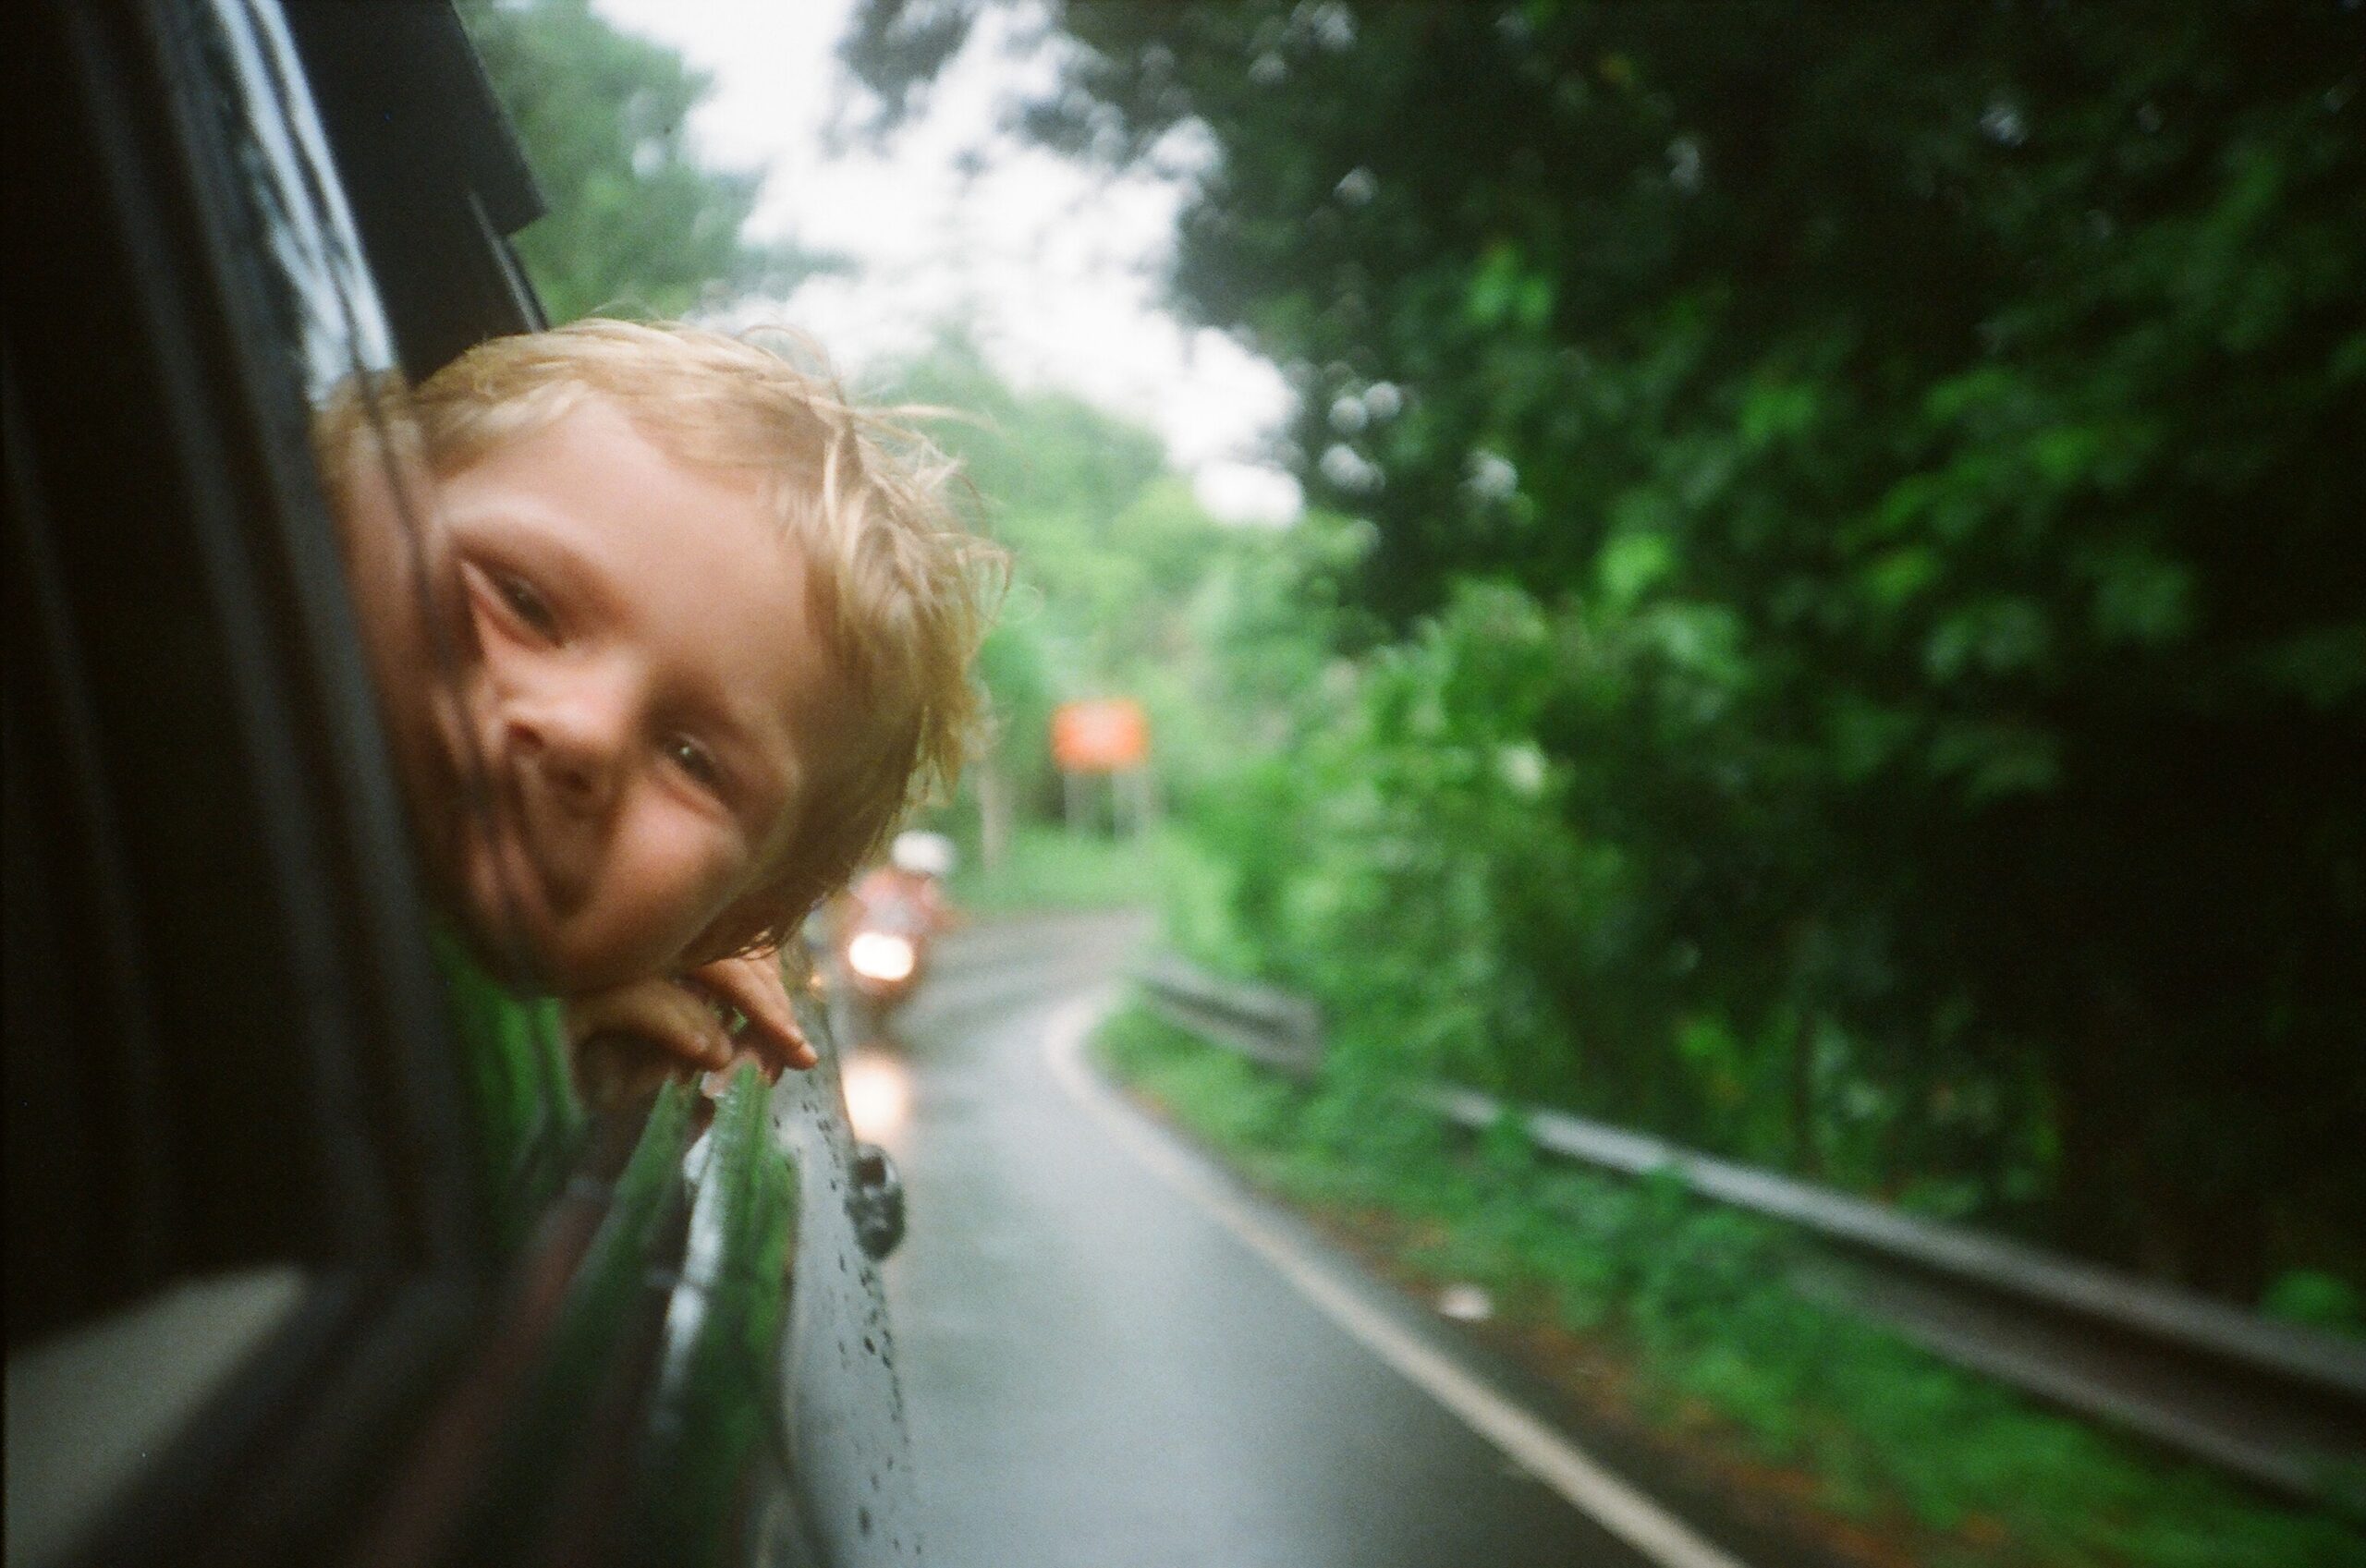 A small boy putting his head out of the car window